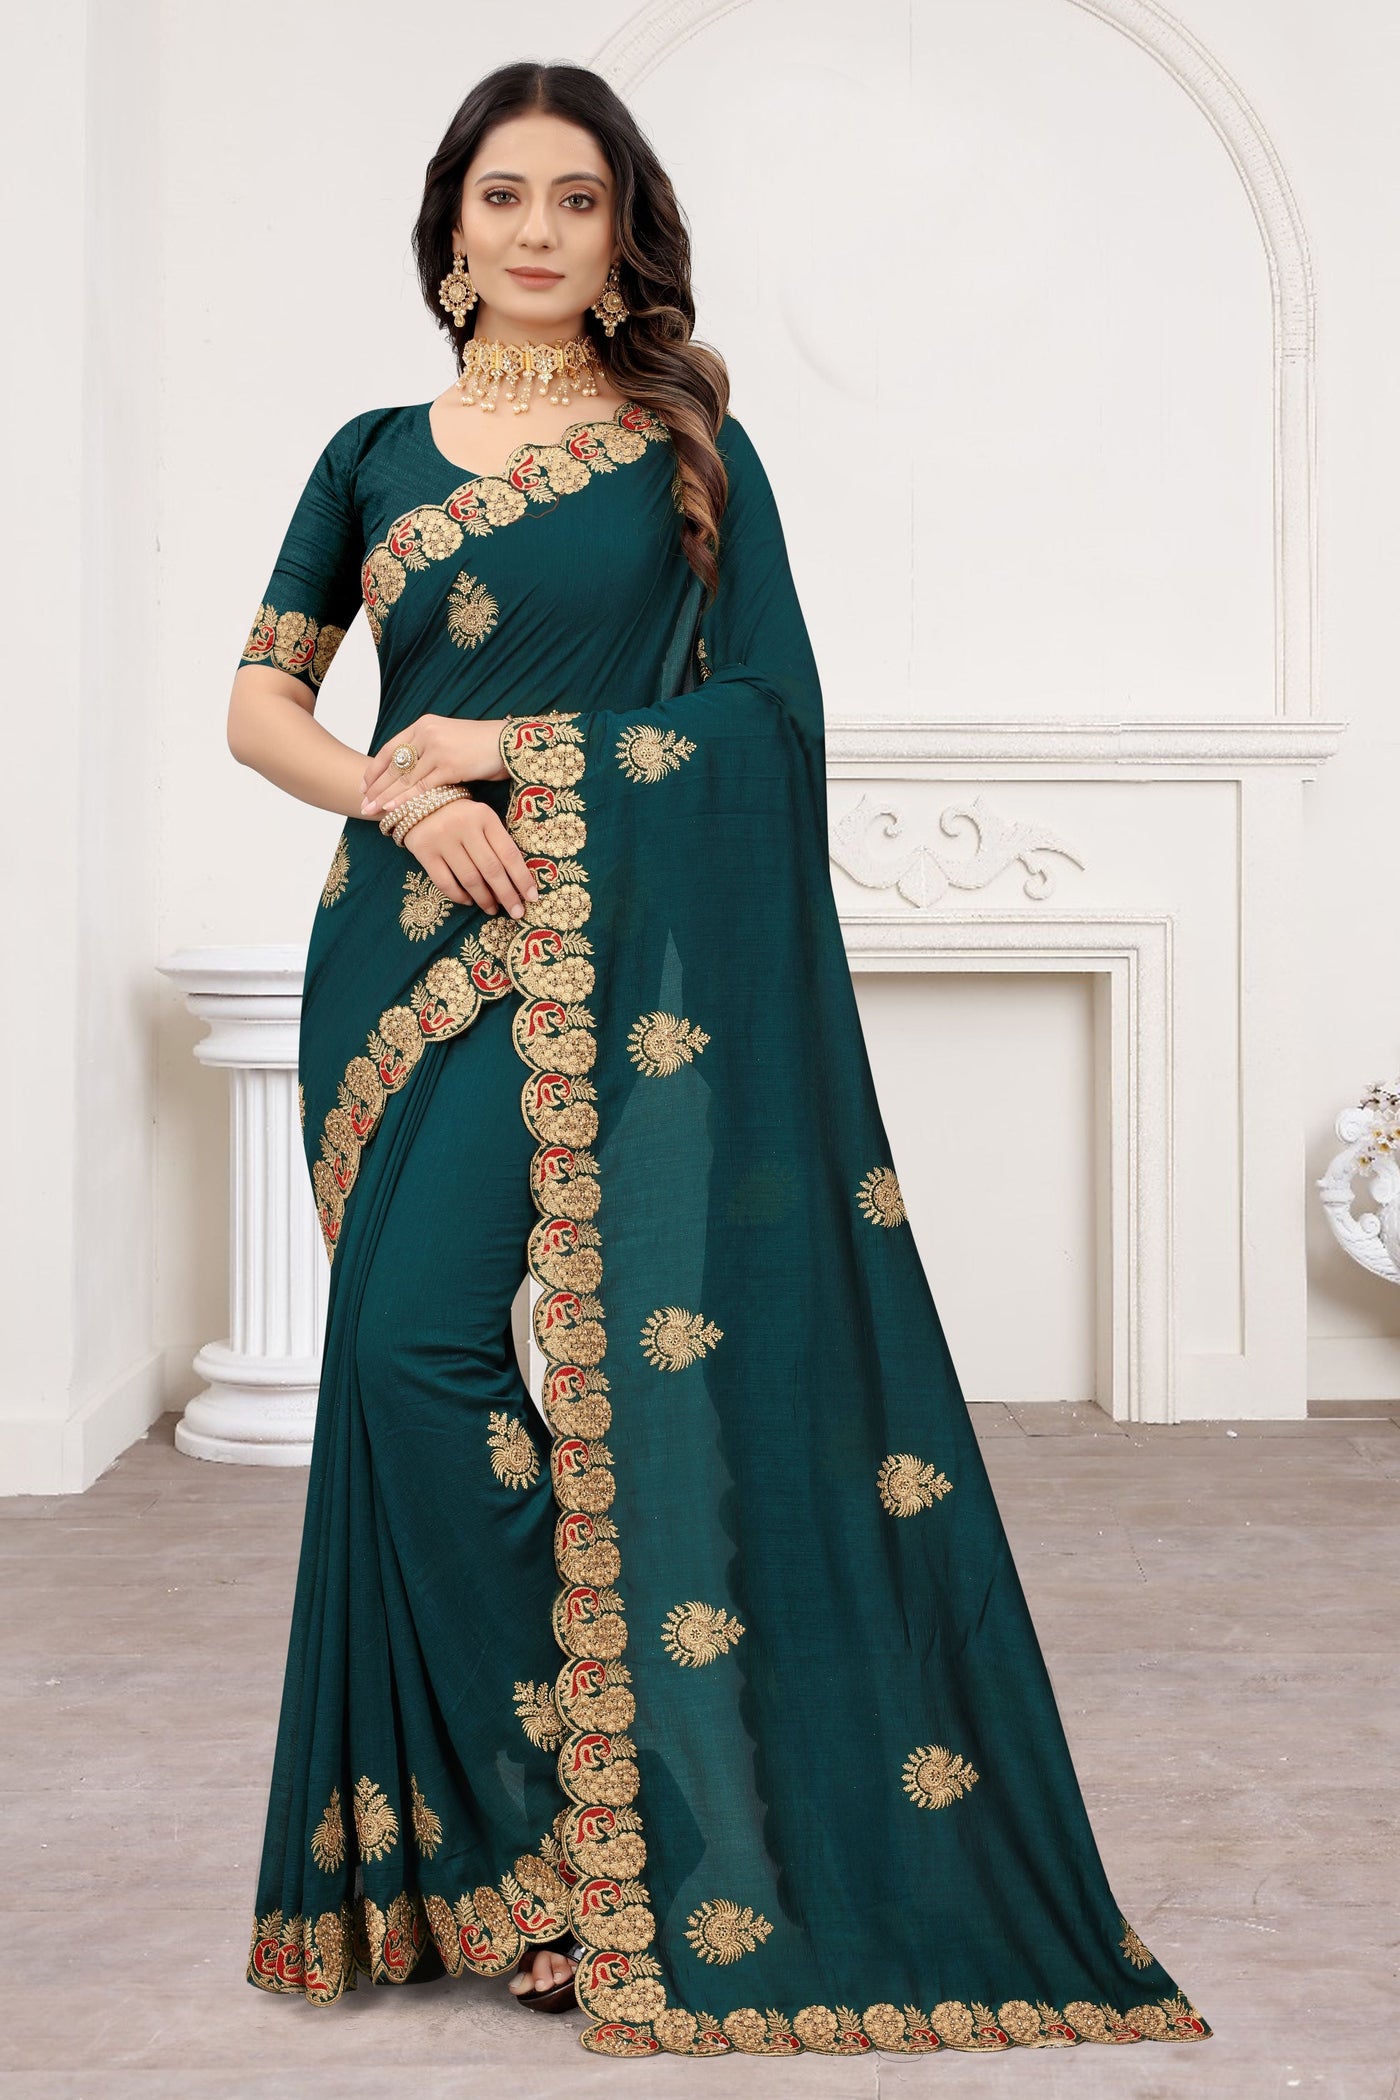 Peacock Blue Vichitra Silk Embroidered Saree With Blouse